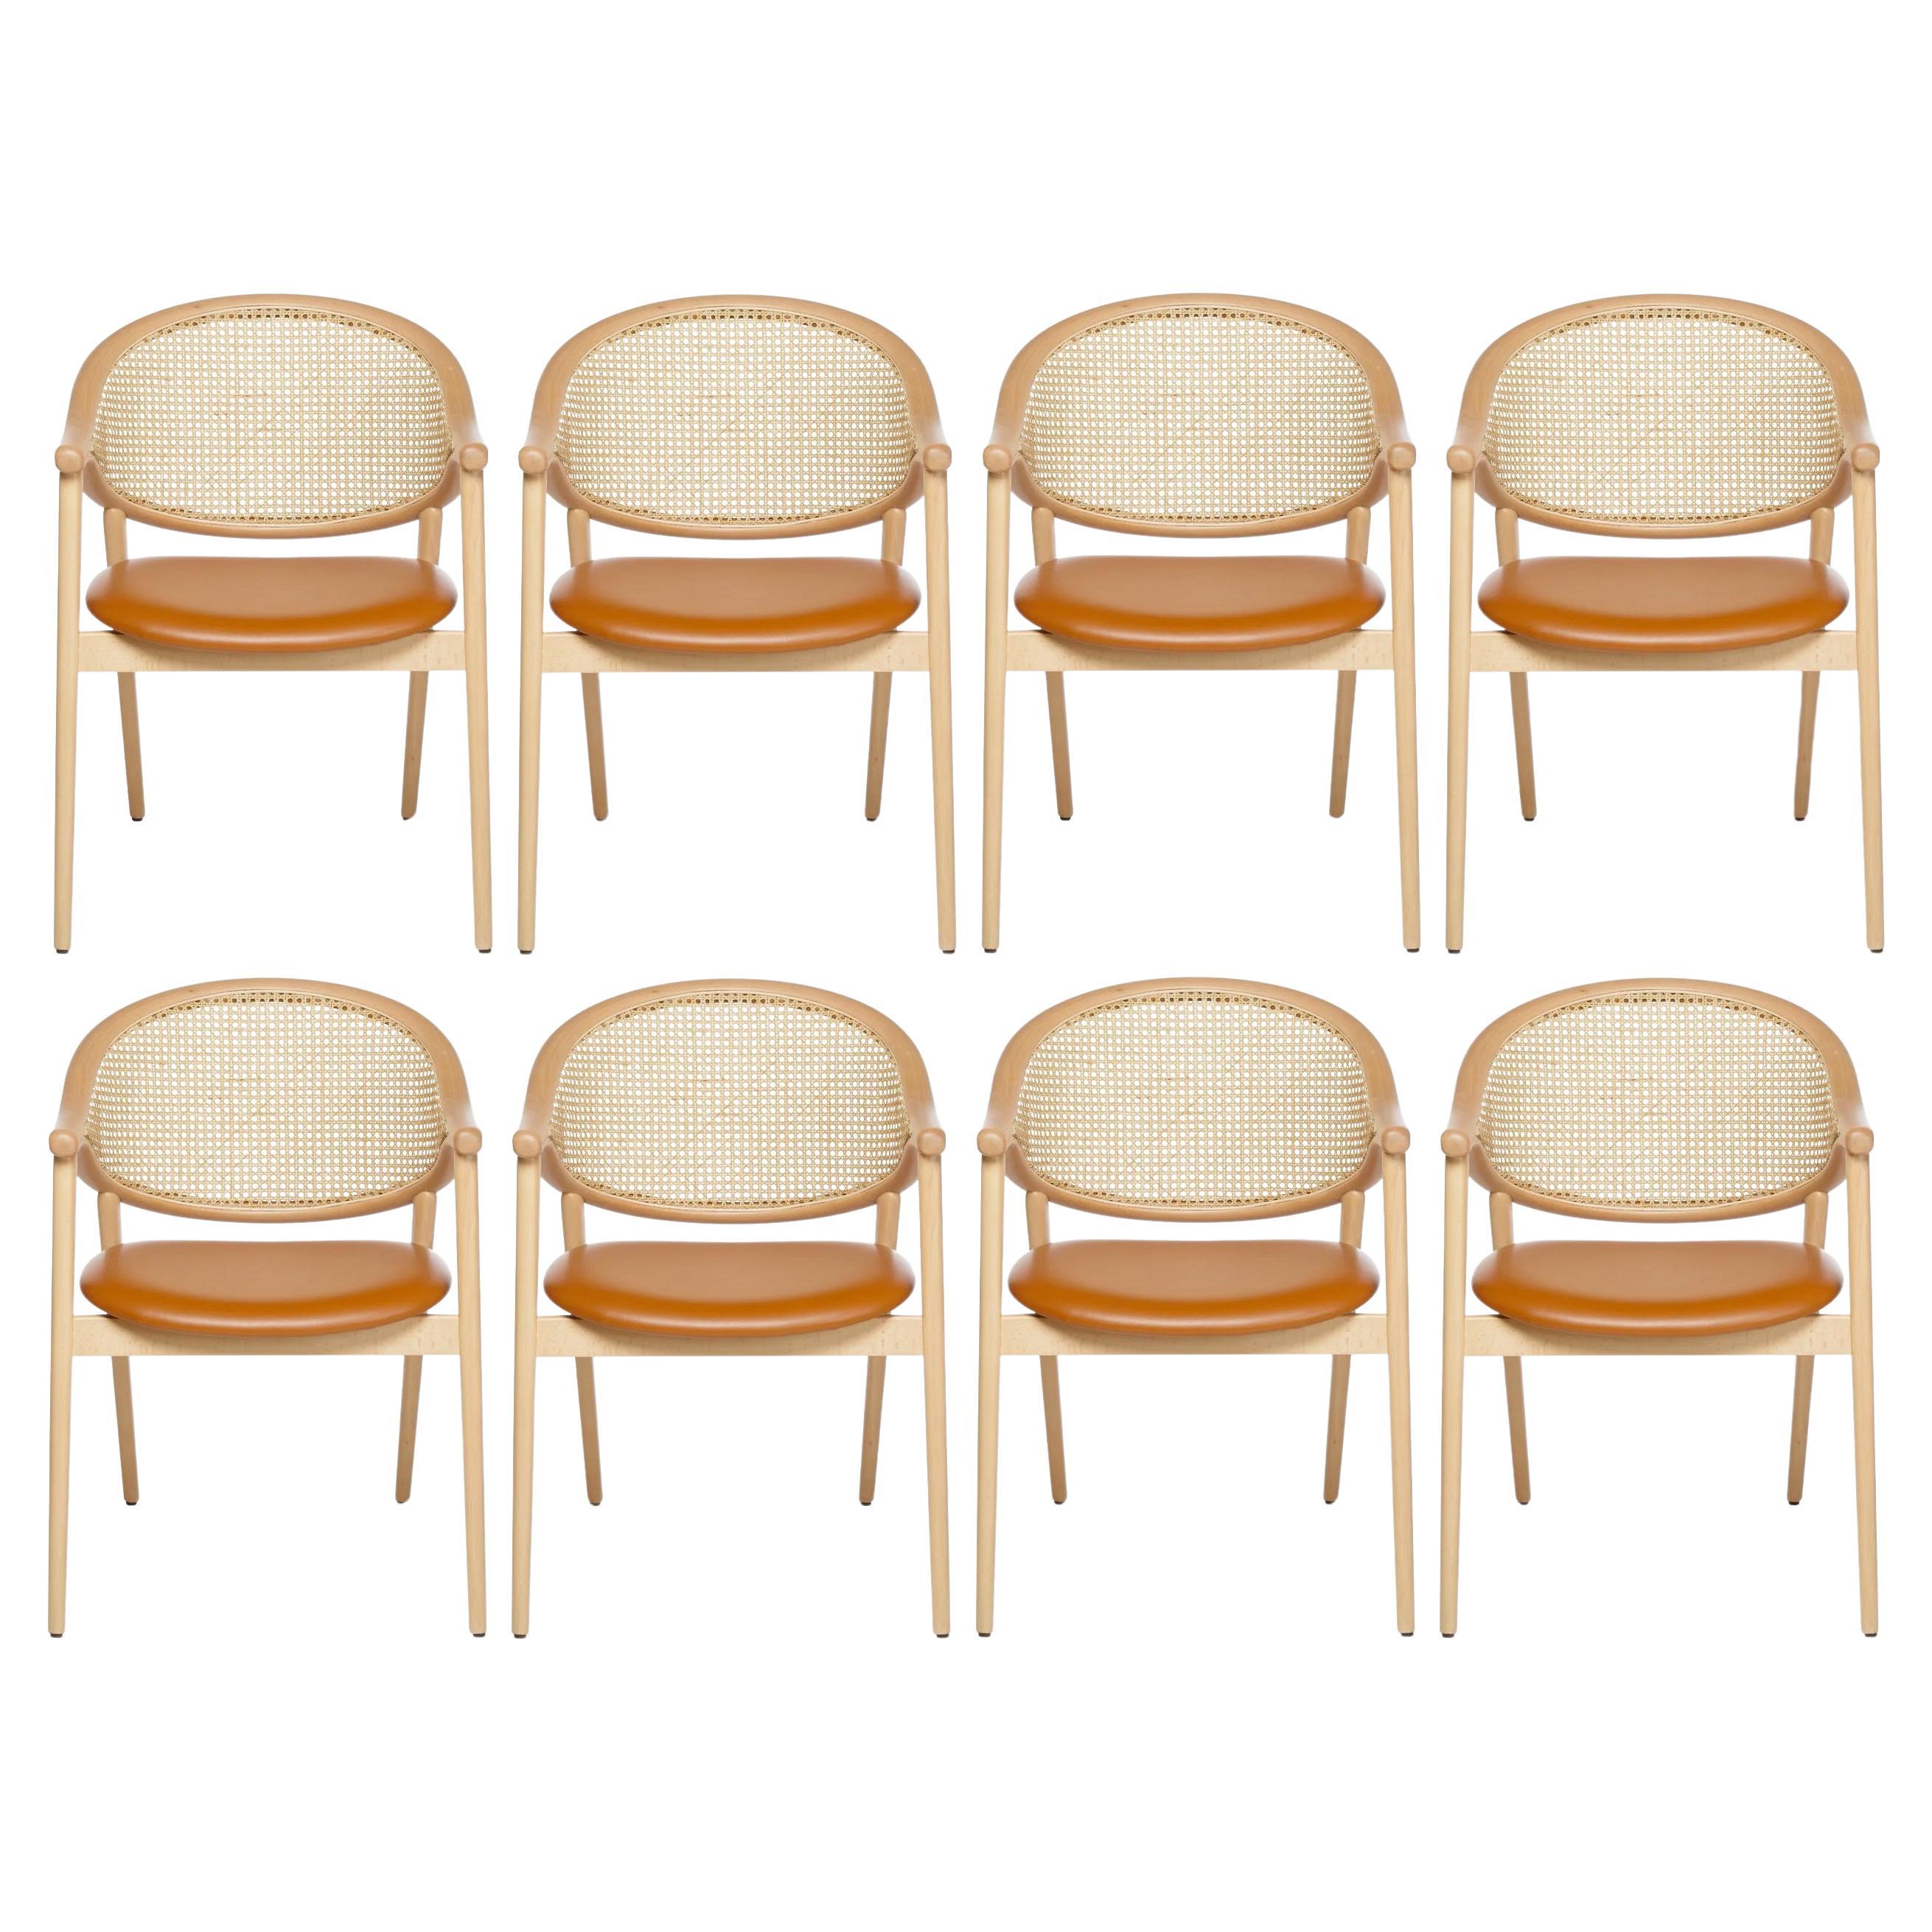 Bent Wood Dining Chair With Rattan Cane Backrest, Set of 8